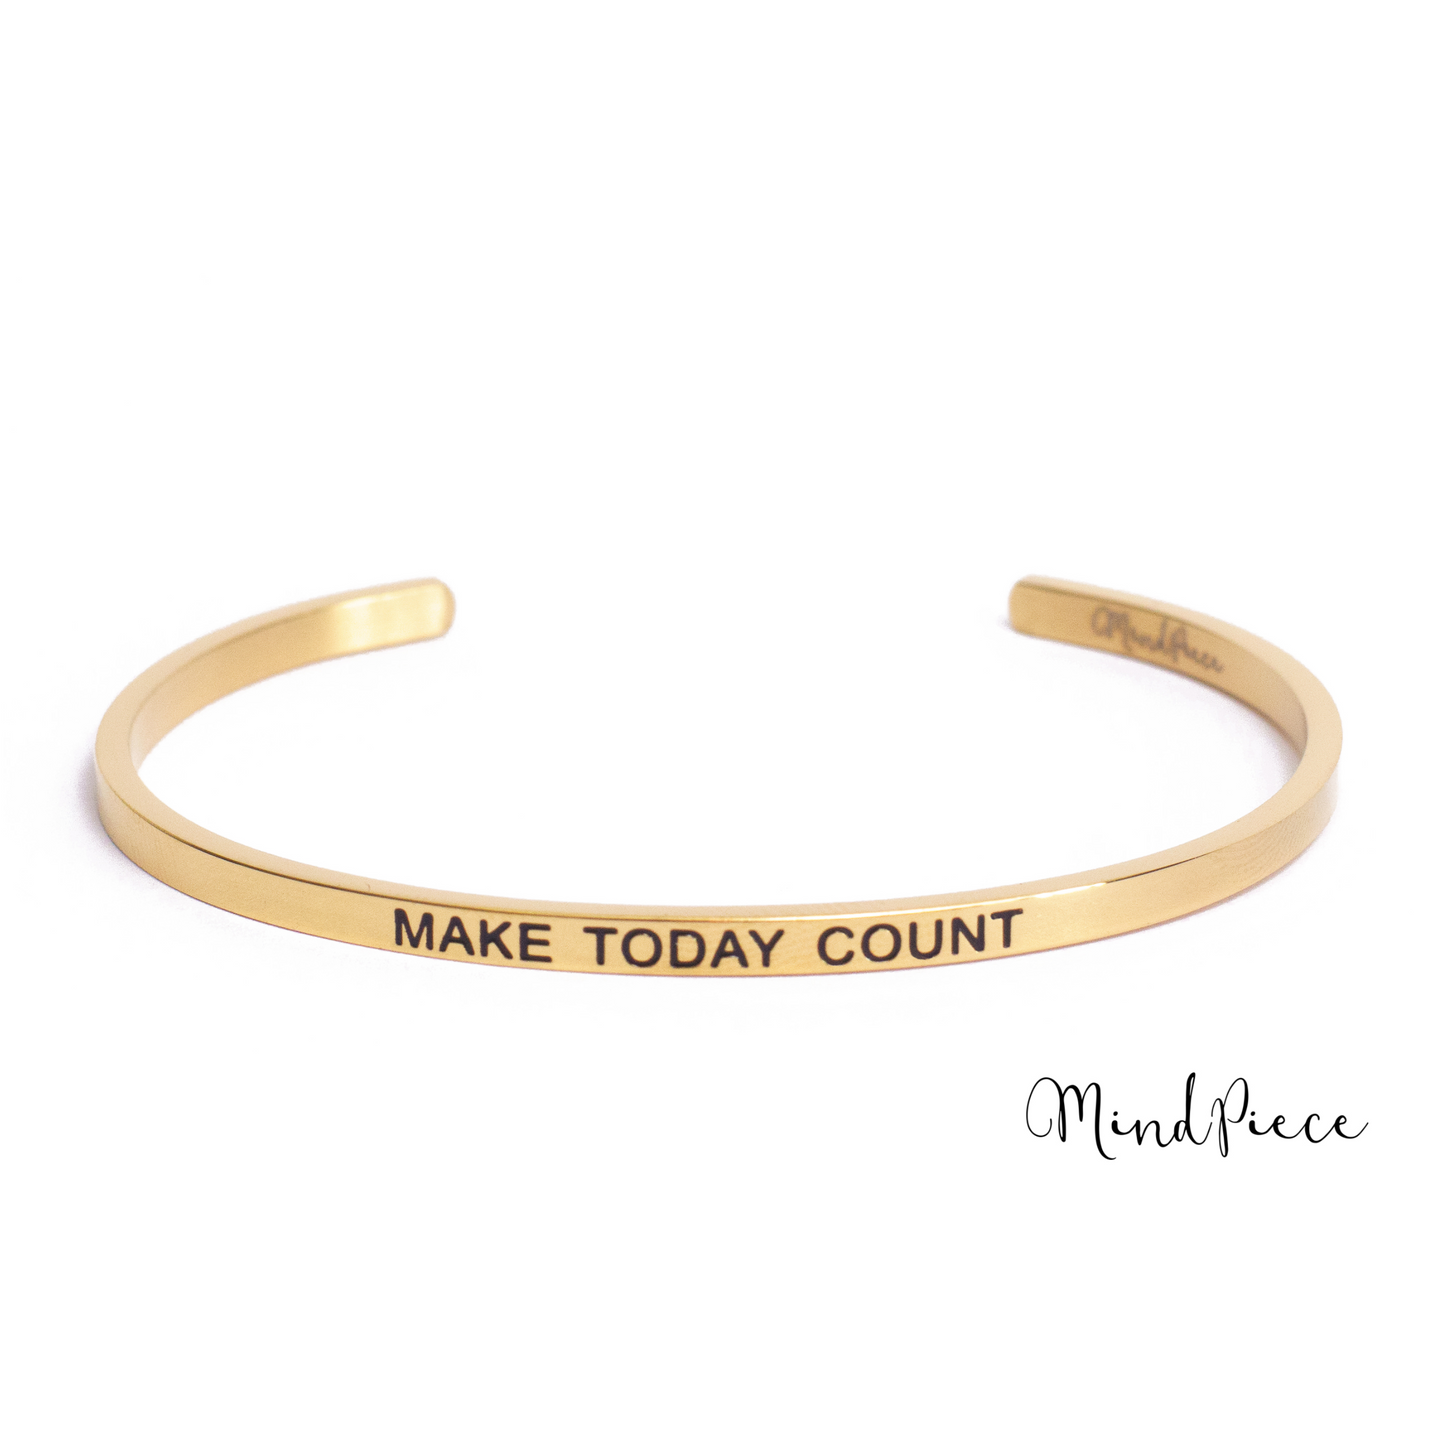 Bracelet quote | make today count (1 pcs) - gold, silver & rose